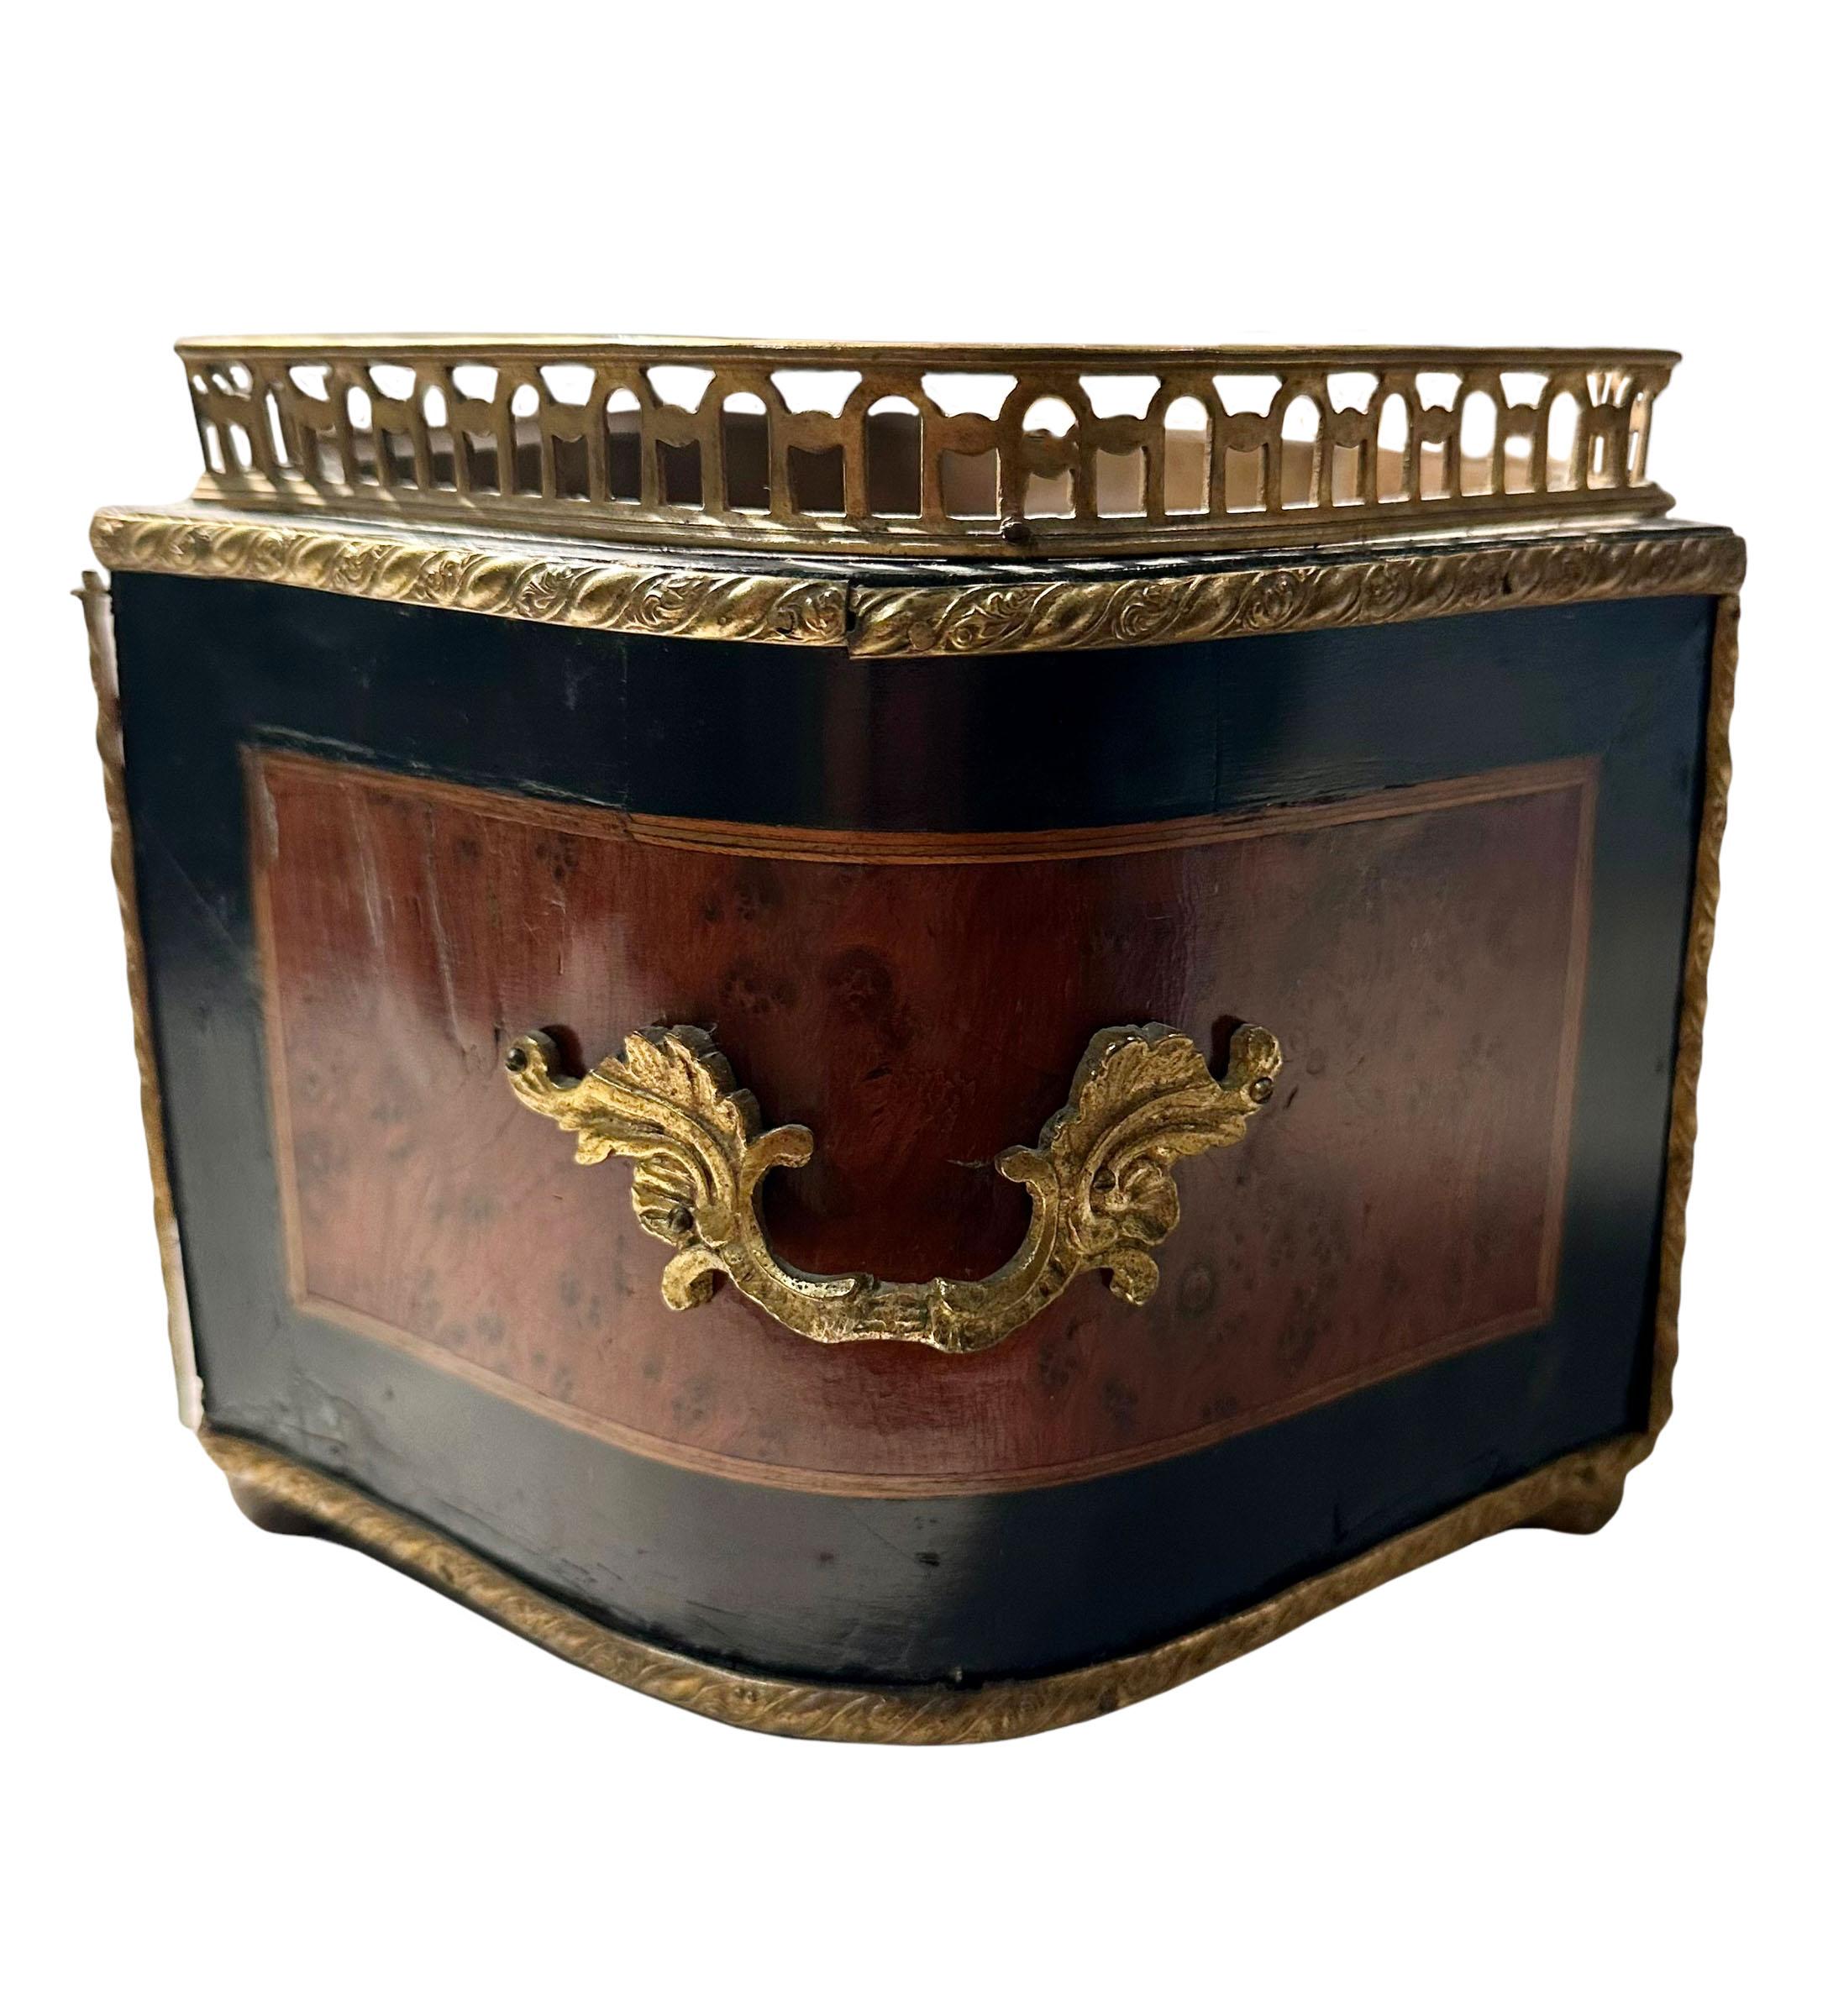 A French jardiniere inlaid with ebony and fruitwood with gilt bronze ormolu handles and feet. The planter has a very nice brass liner inside and is about five inches deep. 